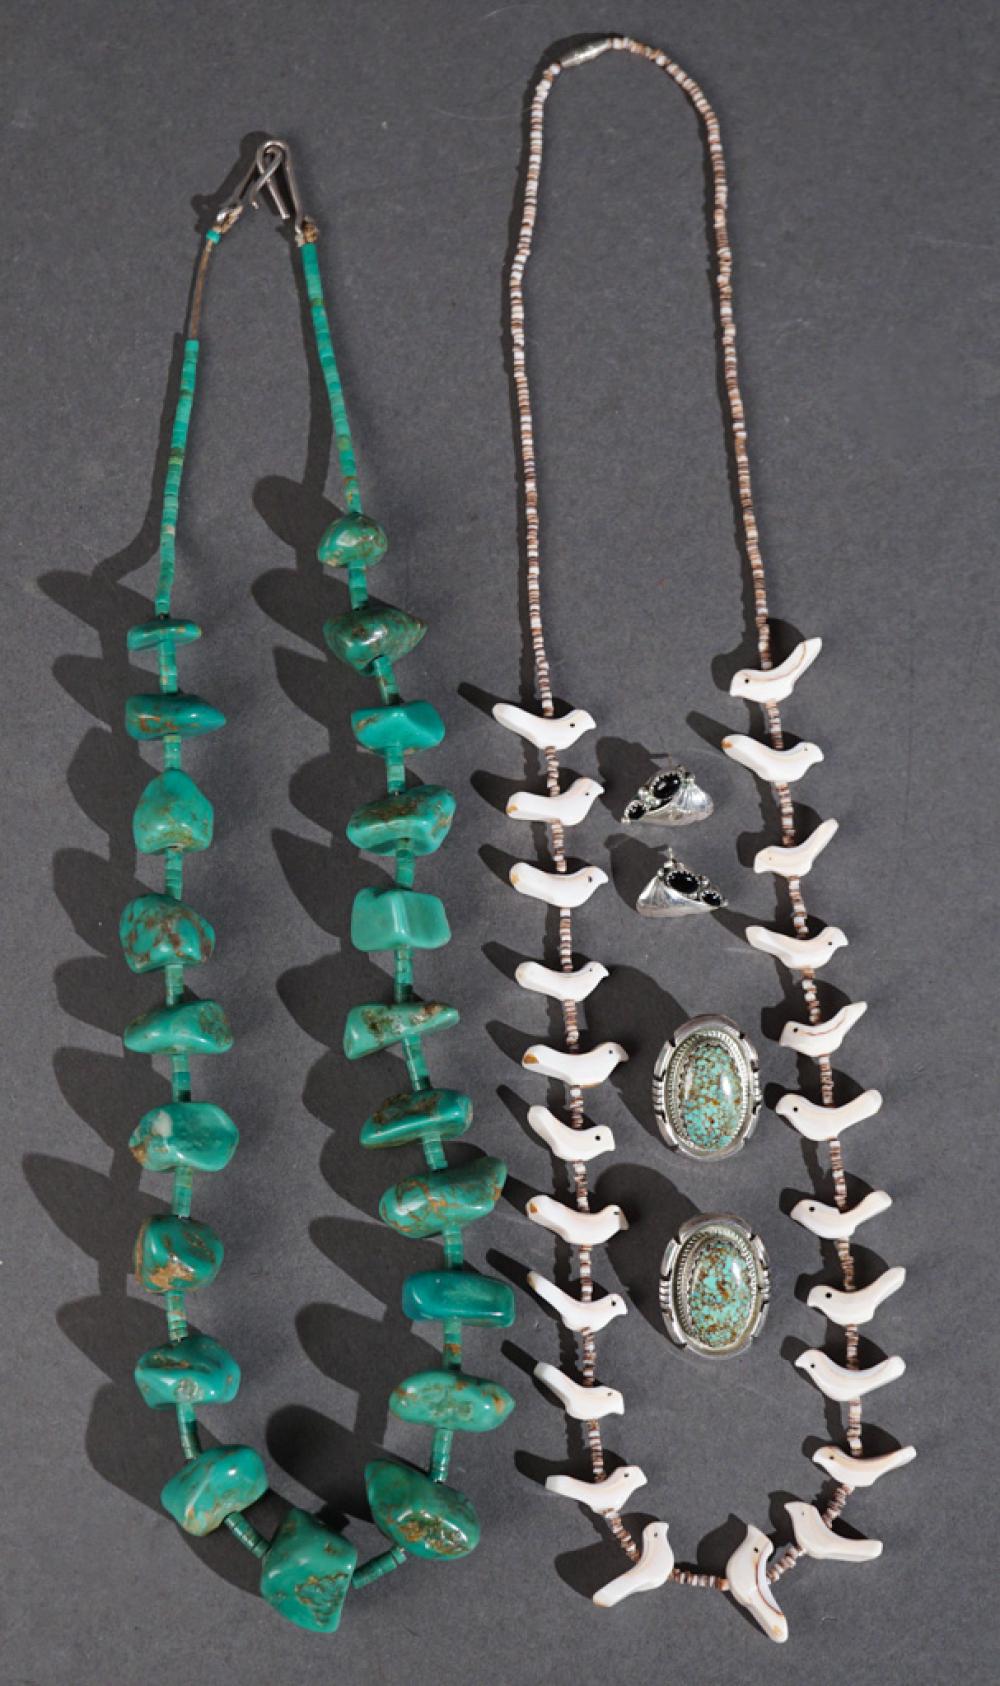 PAIR OF JON MCCRAY SILVER AND TURQUOISE 2e7866